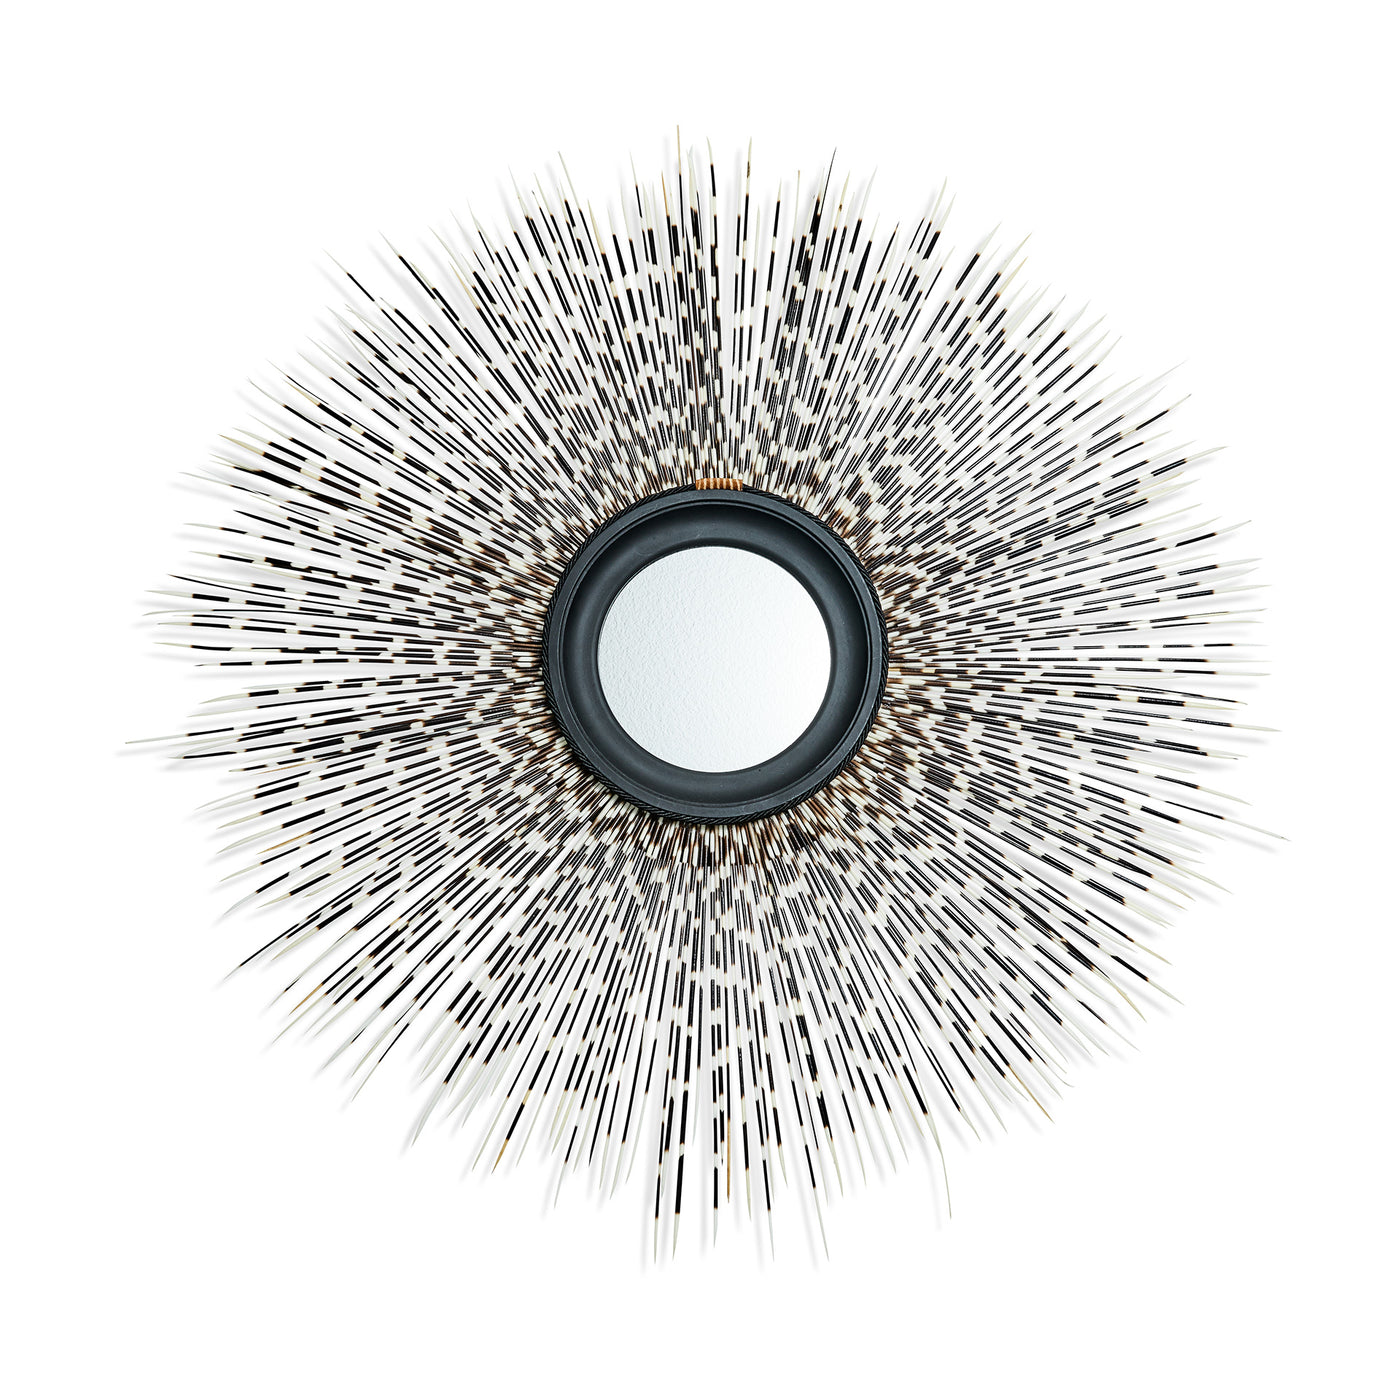 Porcupine Quill Frame Mirror